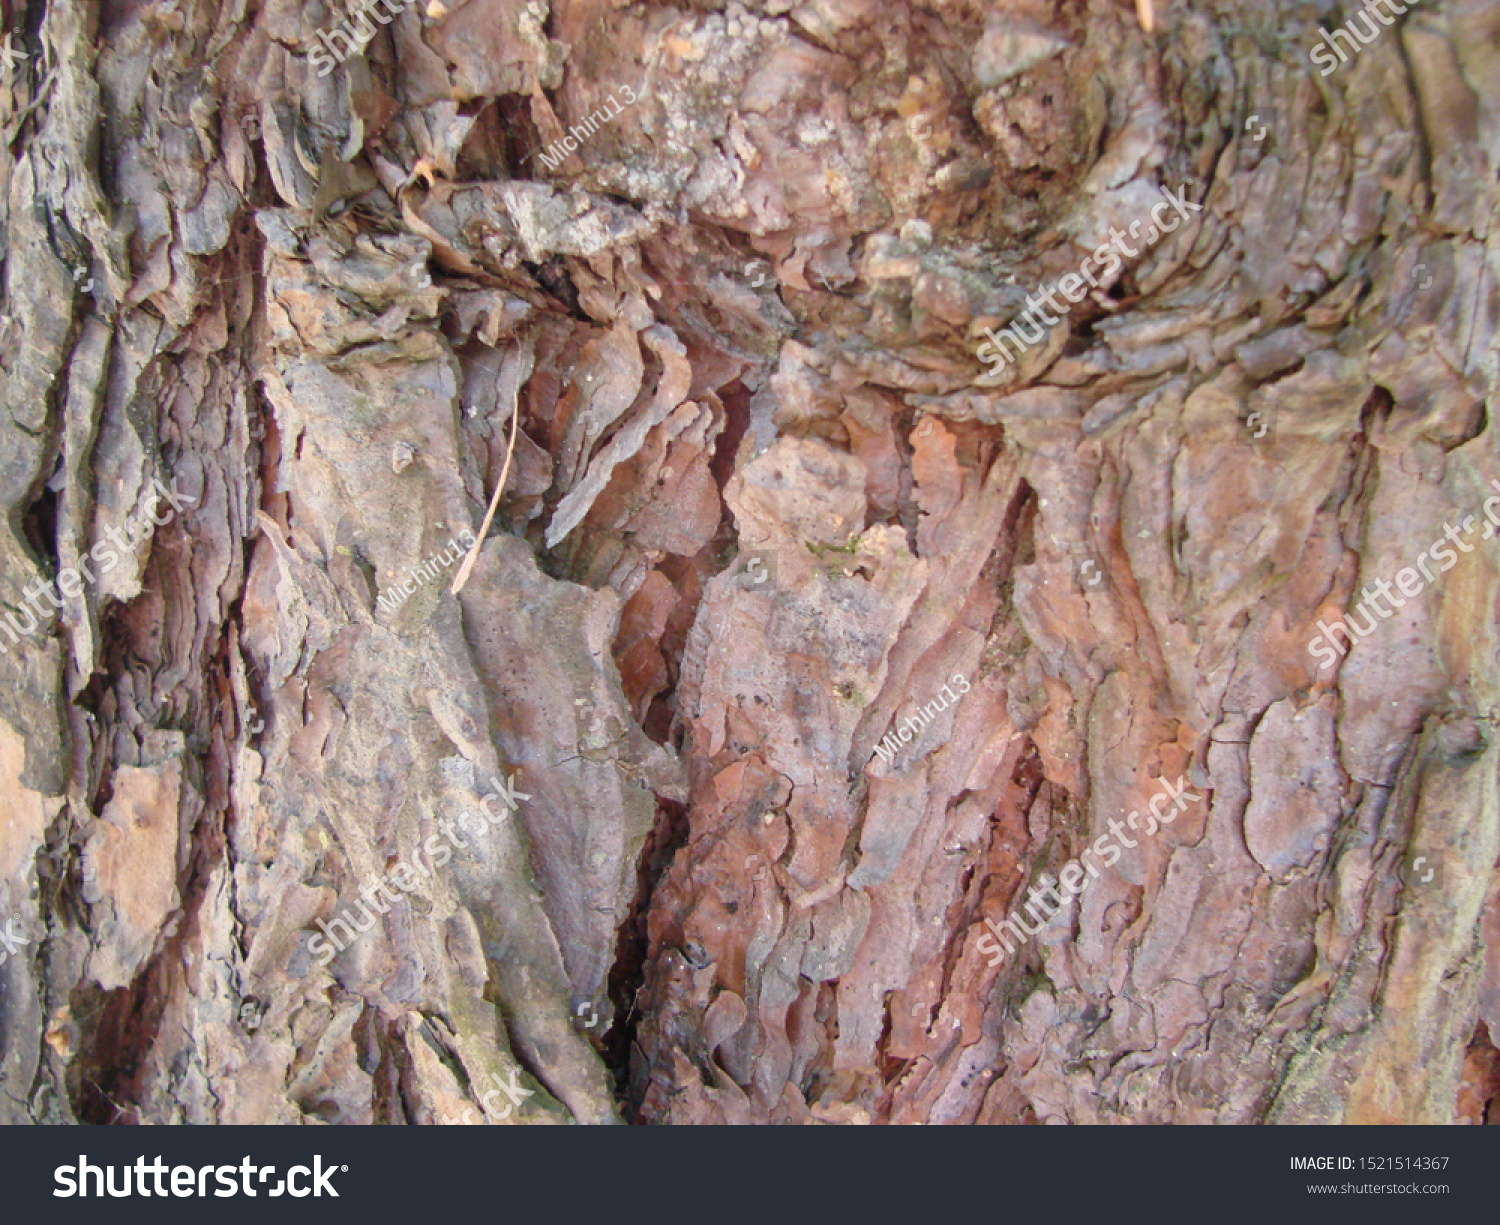 detail of the bark of a trunk of stone pine, stone pine, umbrella pine, parasol pine, Pinus pinea, in natural environment #1521514367